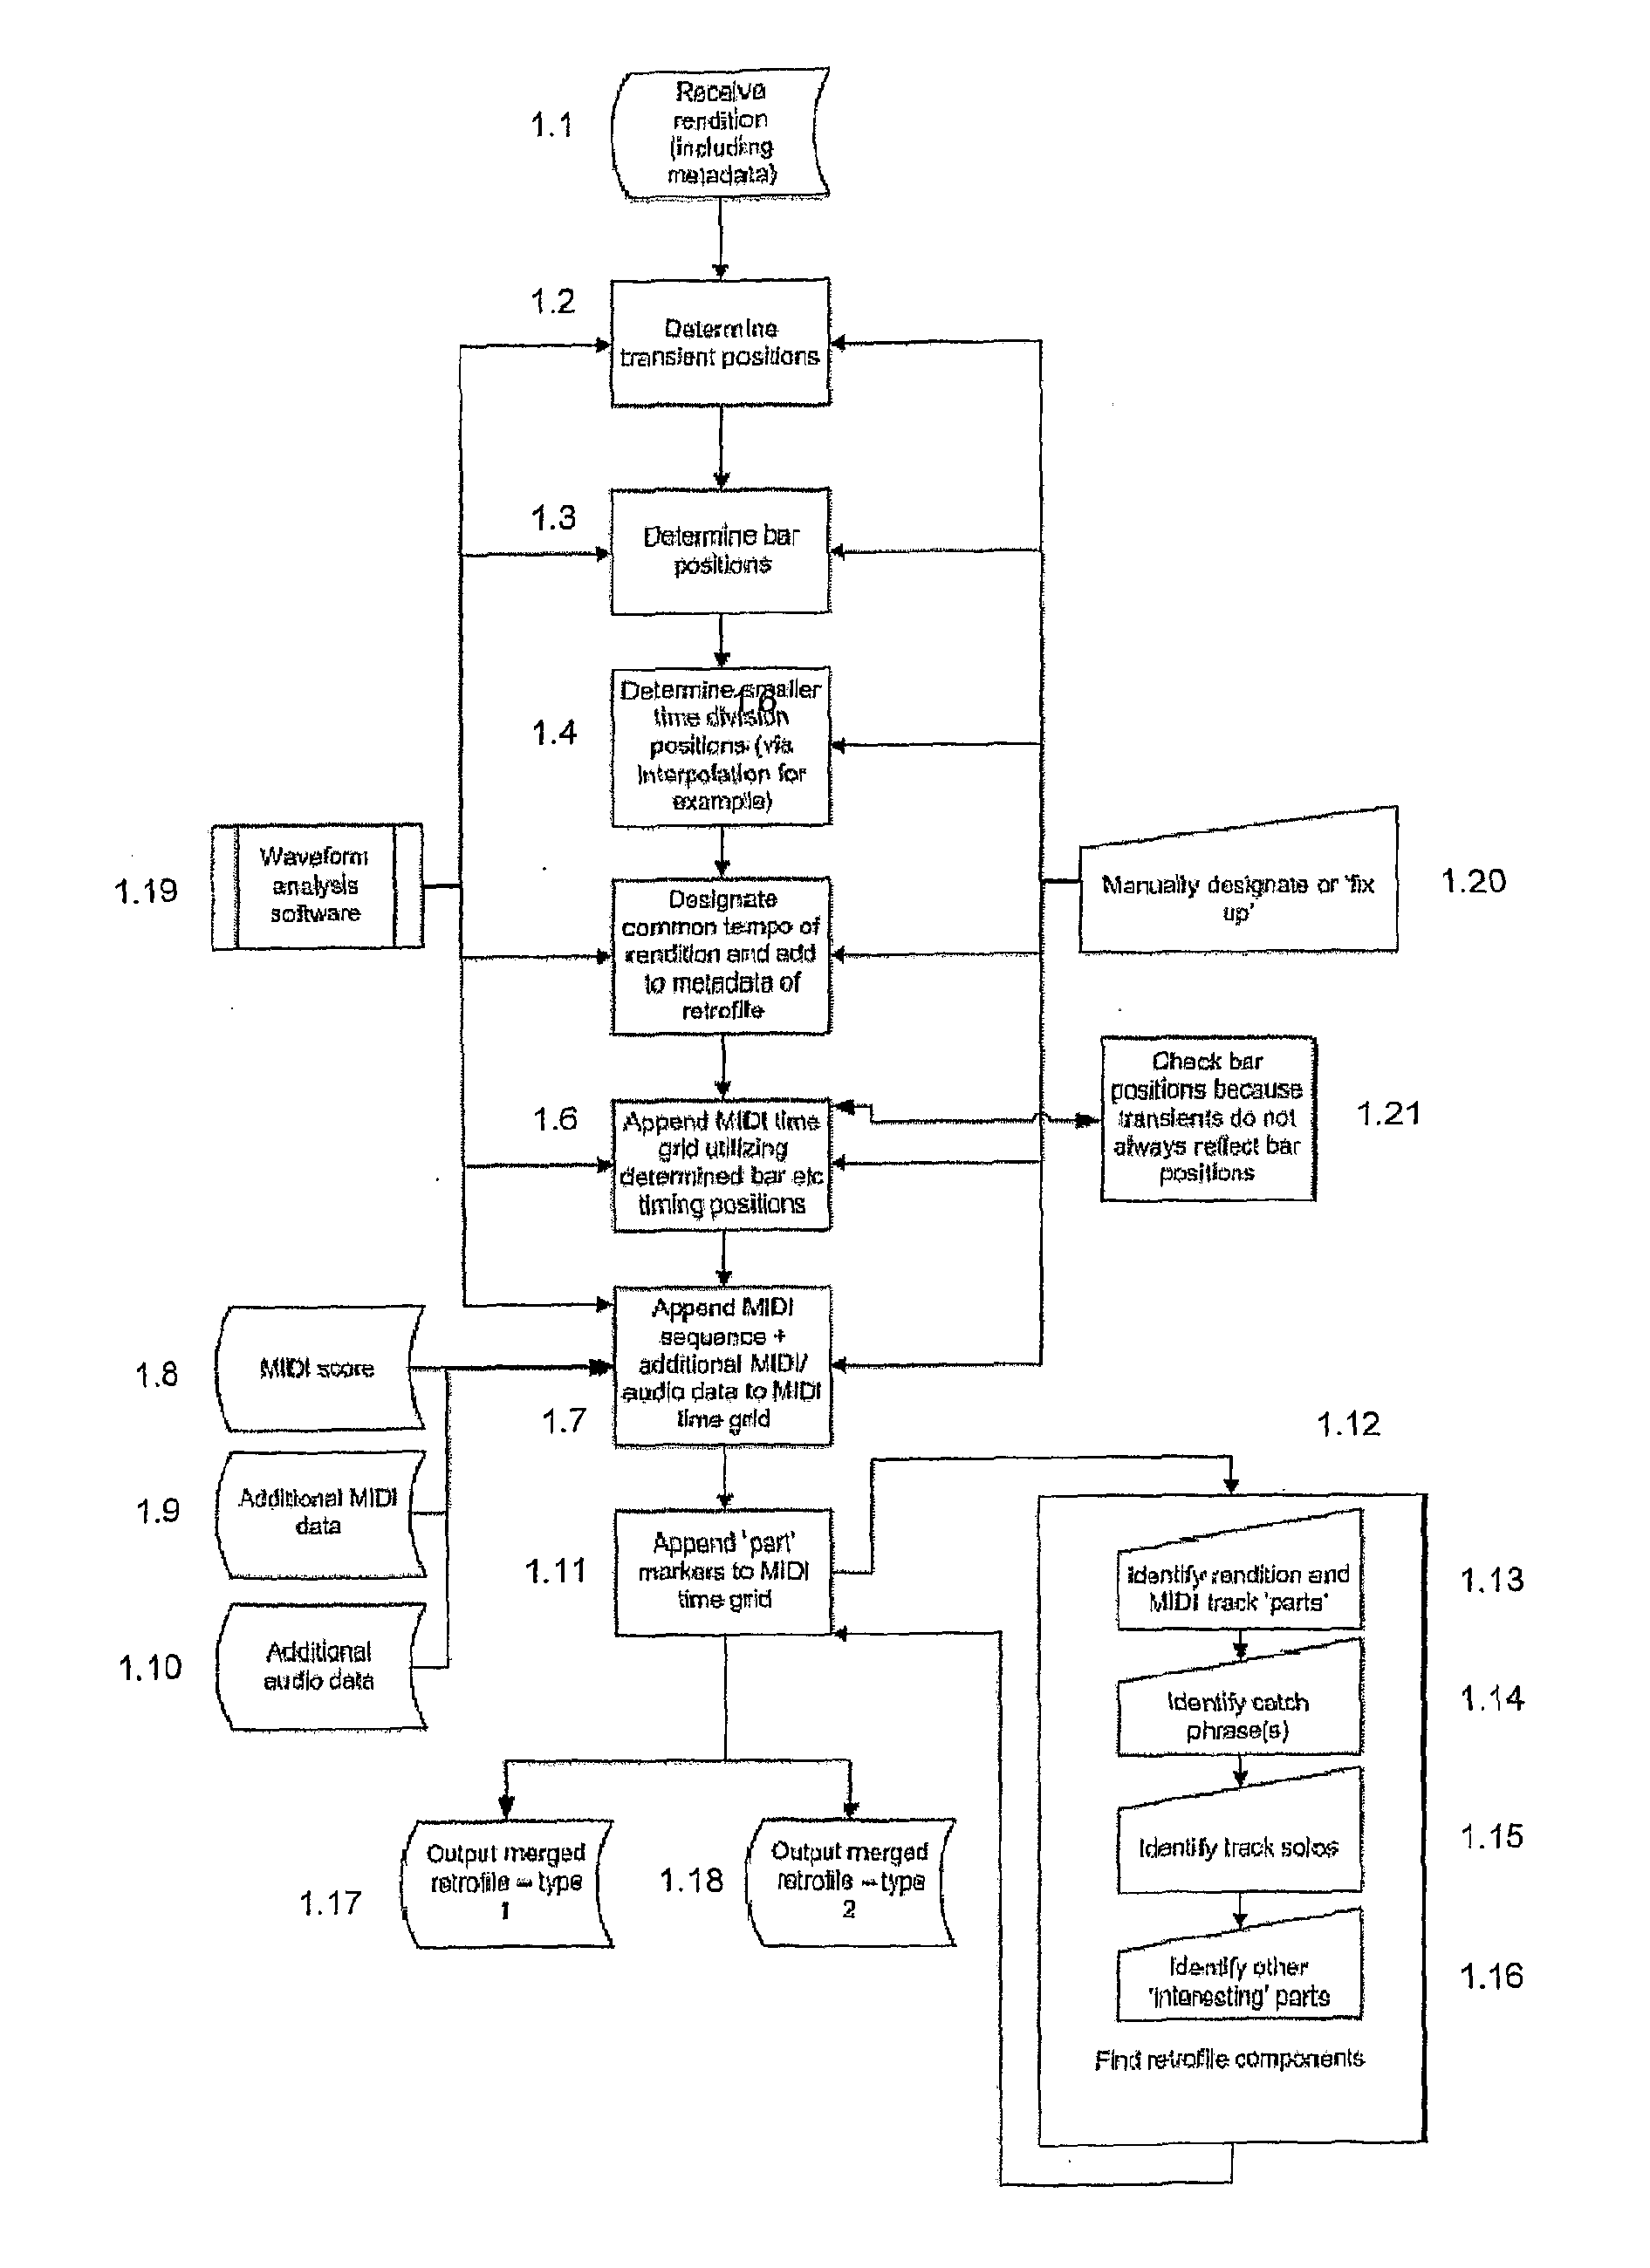 File creation process, file format and file playback apparatus enabling advanced audio interaction and collaboration capabilities